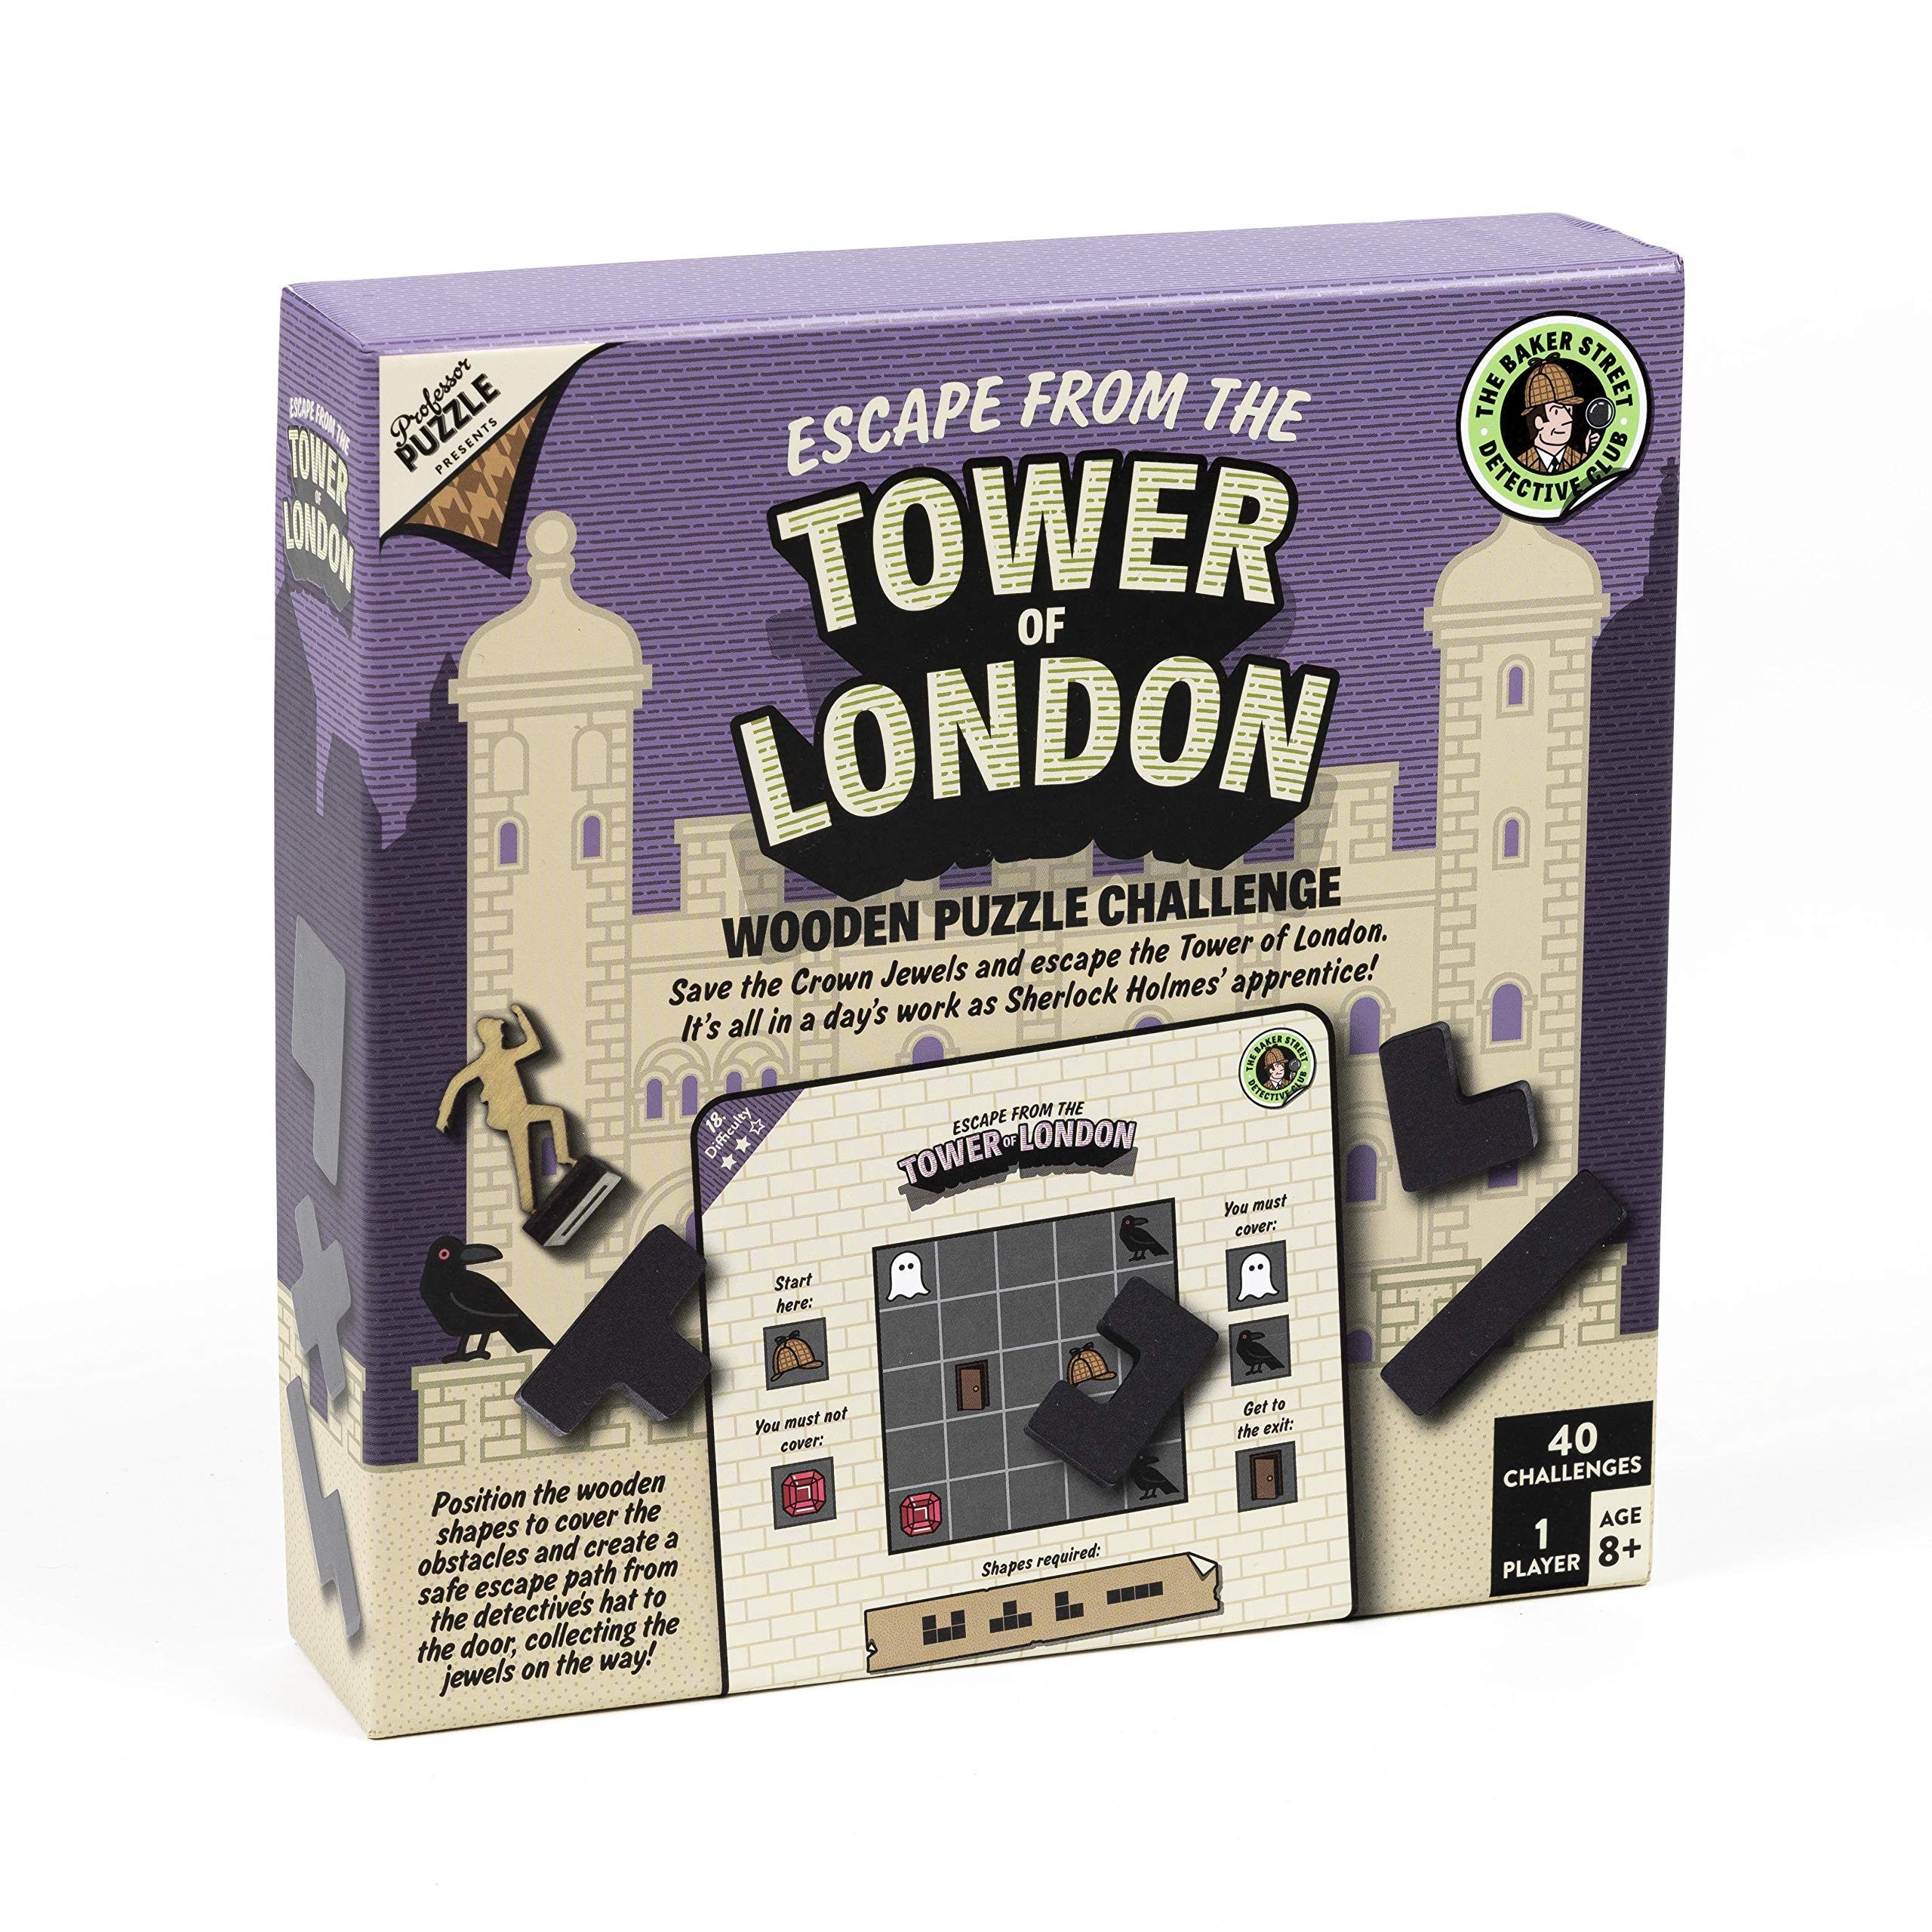 Escape from the Tower of London